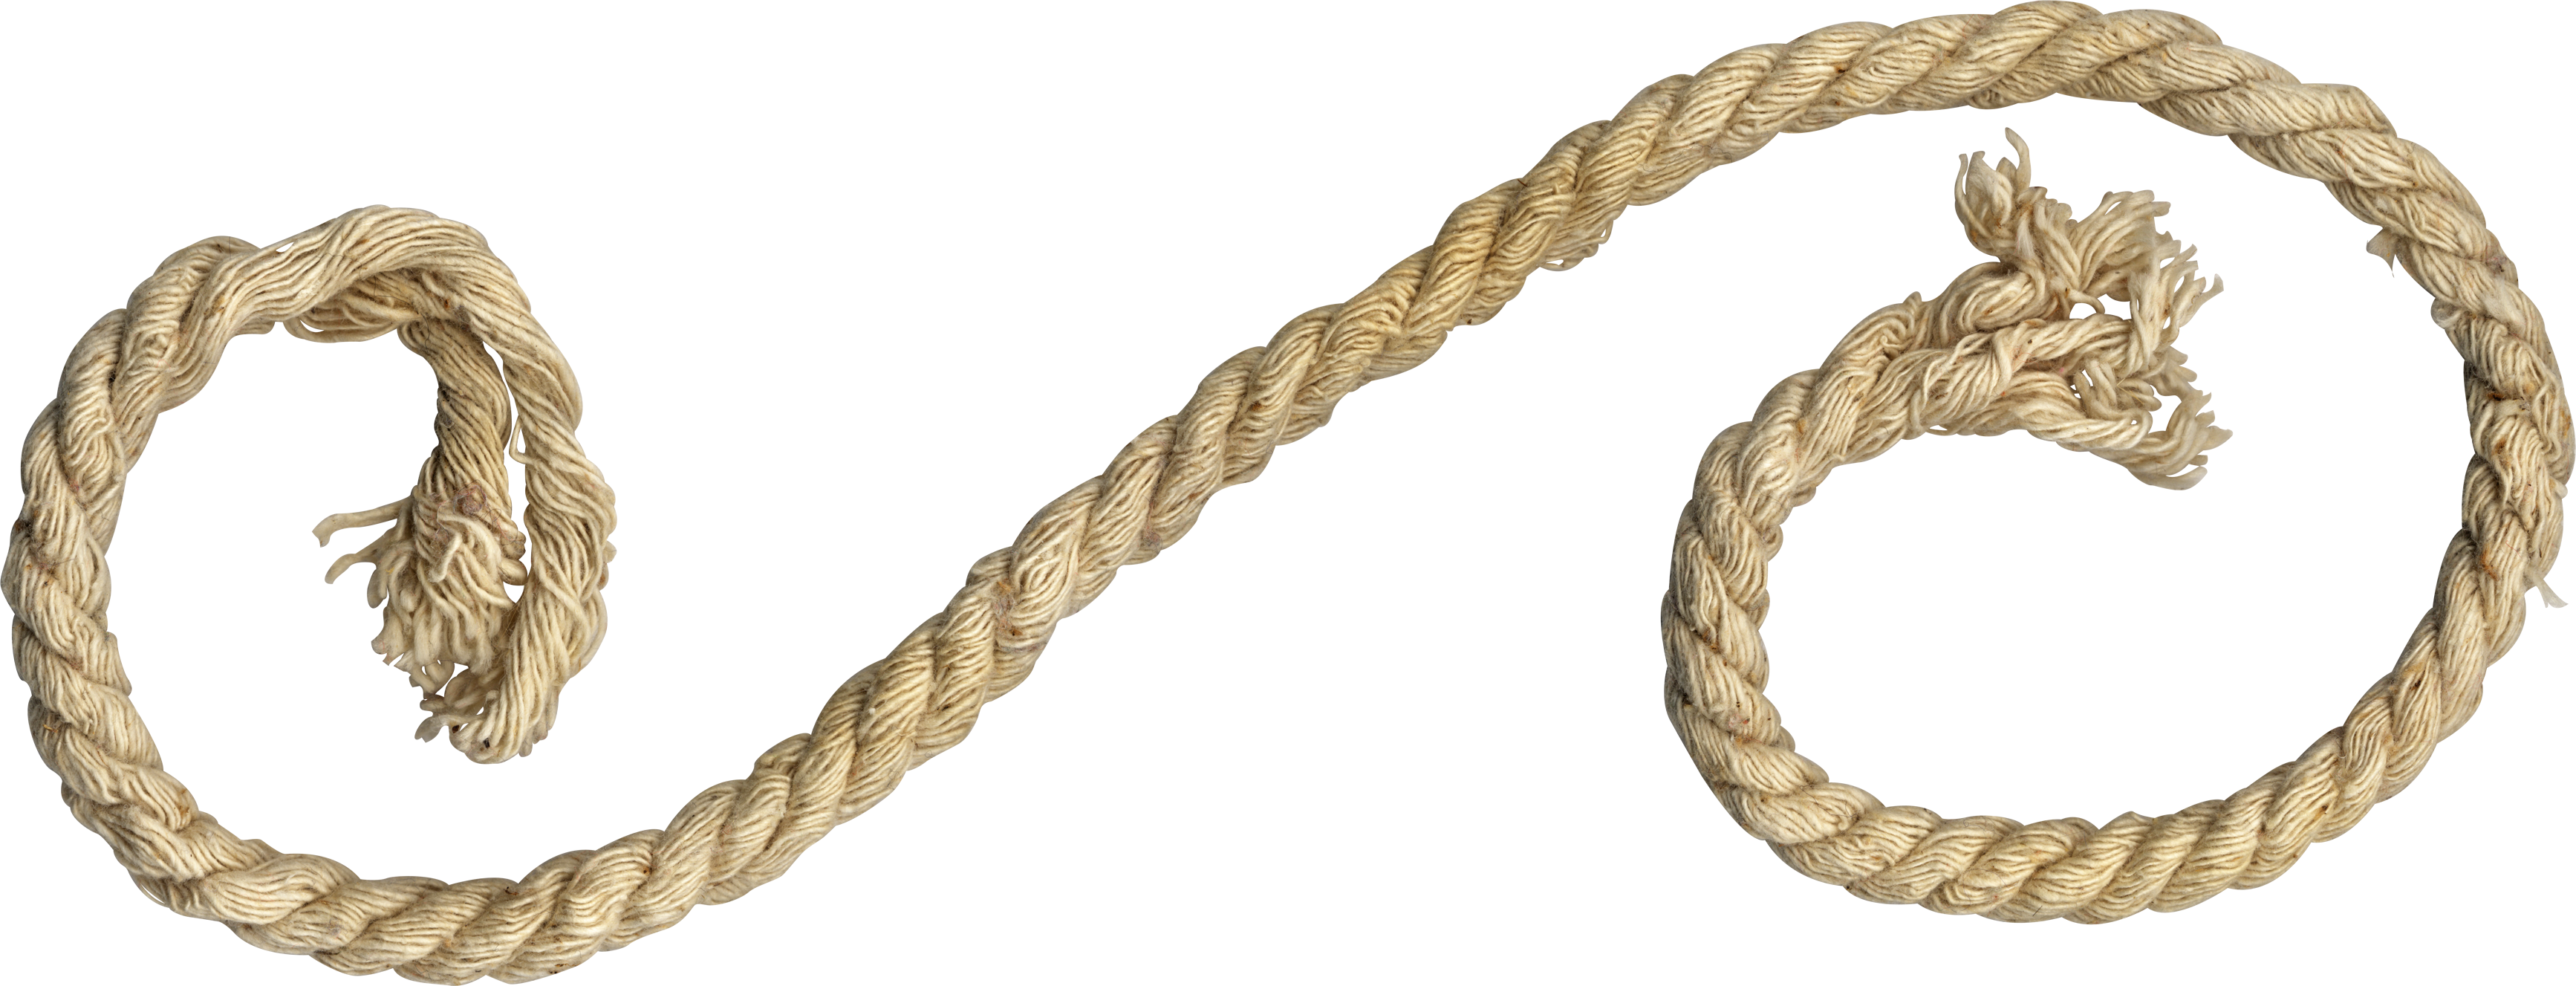 Rope PNG Pic Background